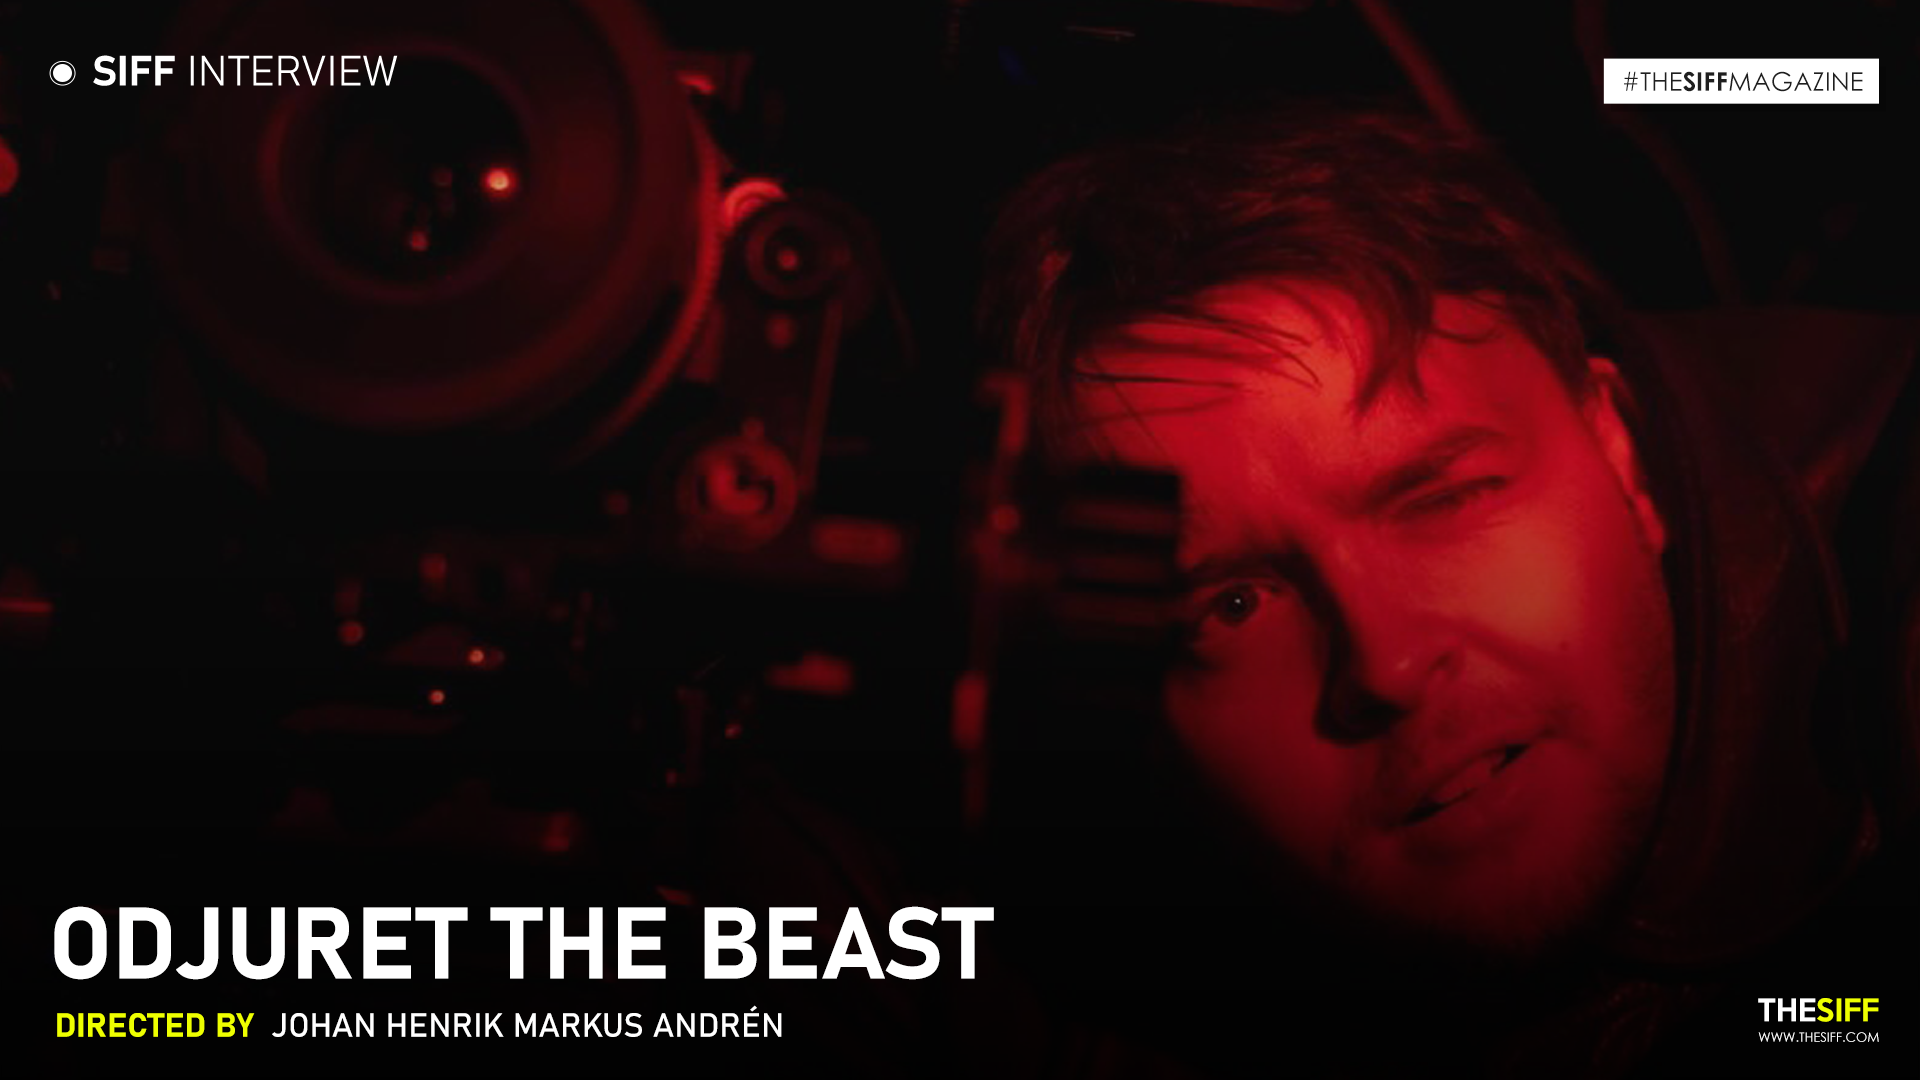 Interview | ODJURET “THE BEAST”